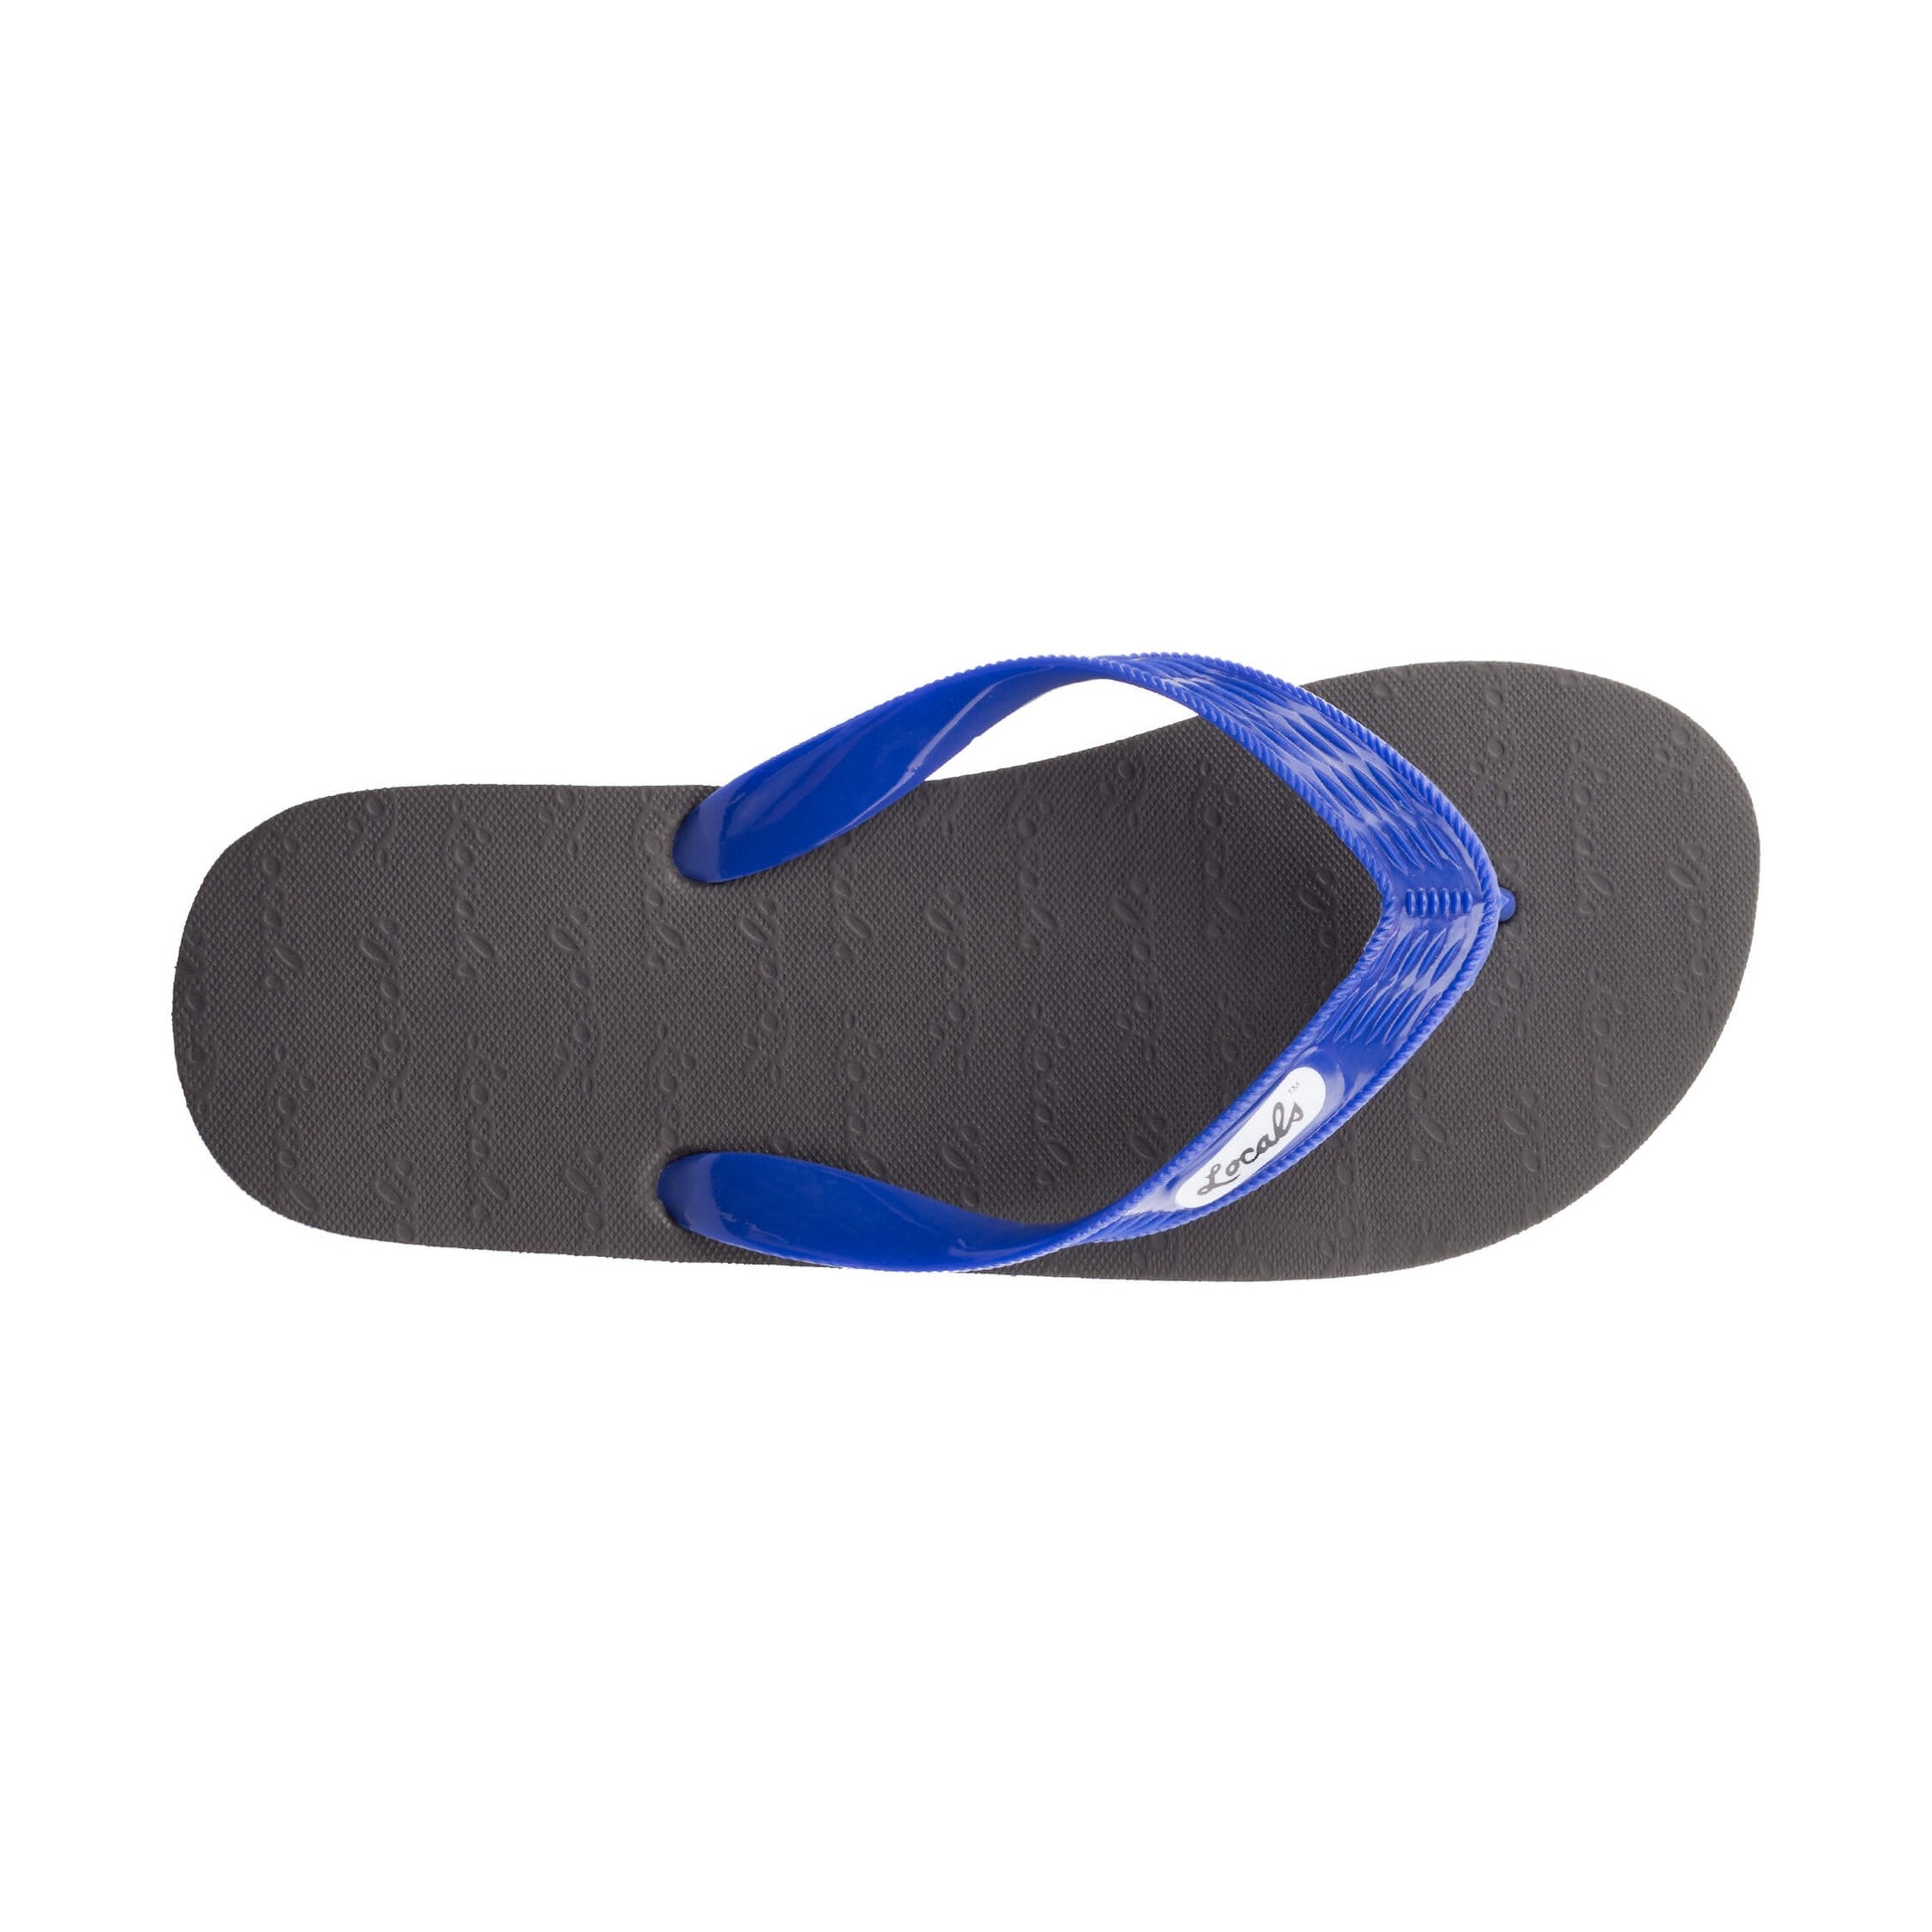 Locals Unisex Stripe Blue II Flip Flops featuring a Black/Blue platform with a White stripe and a Solid Blue strap.